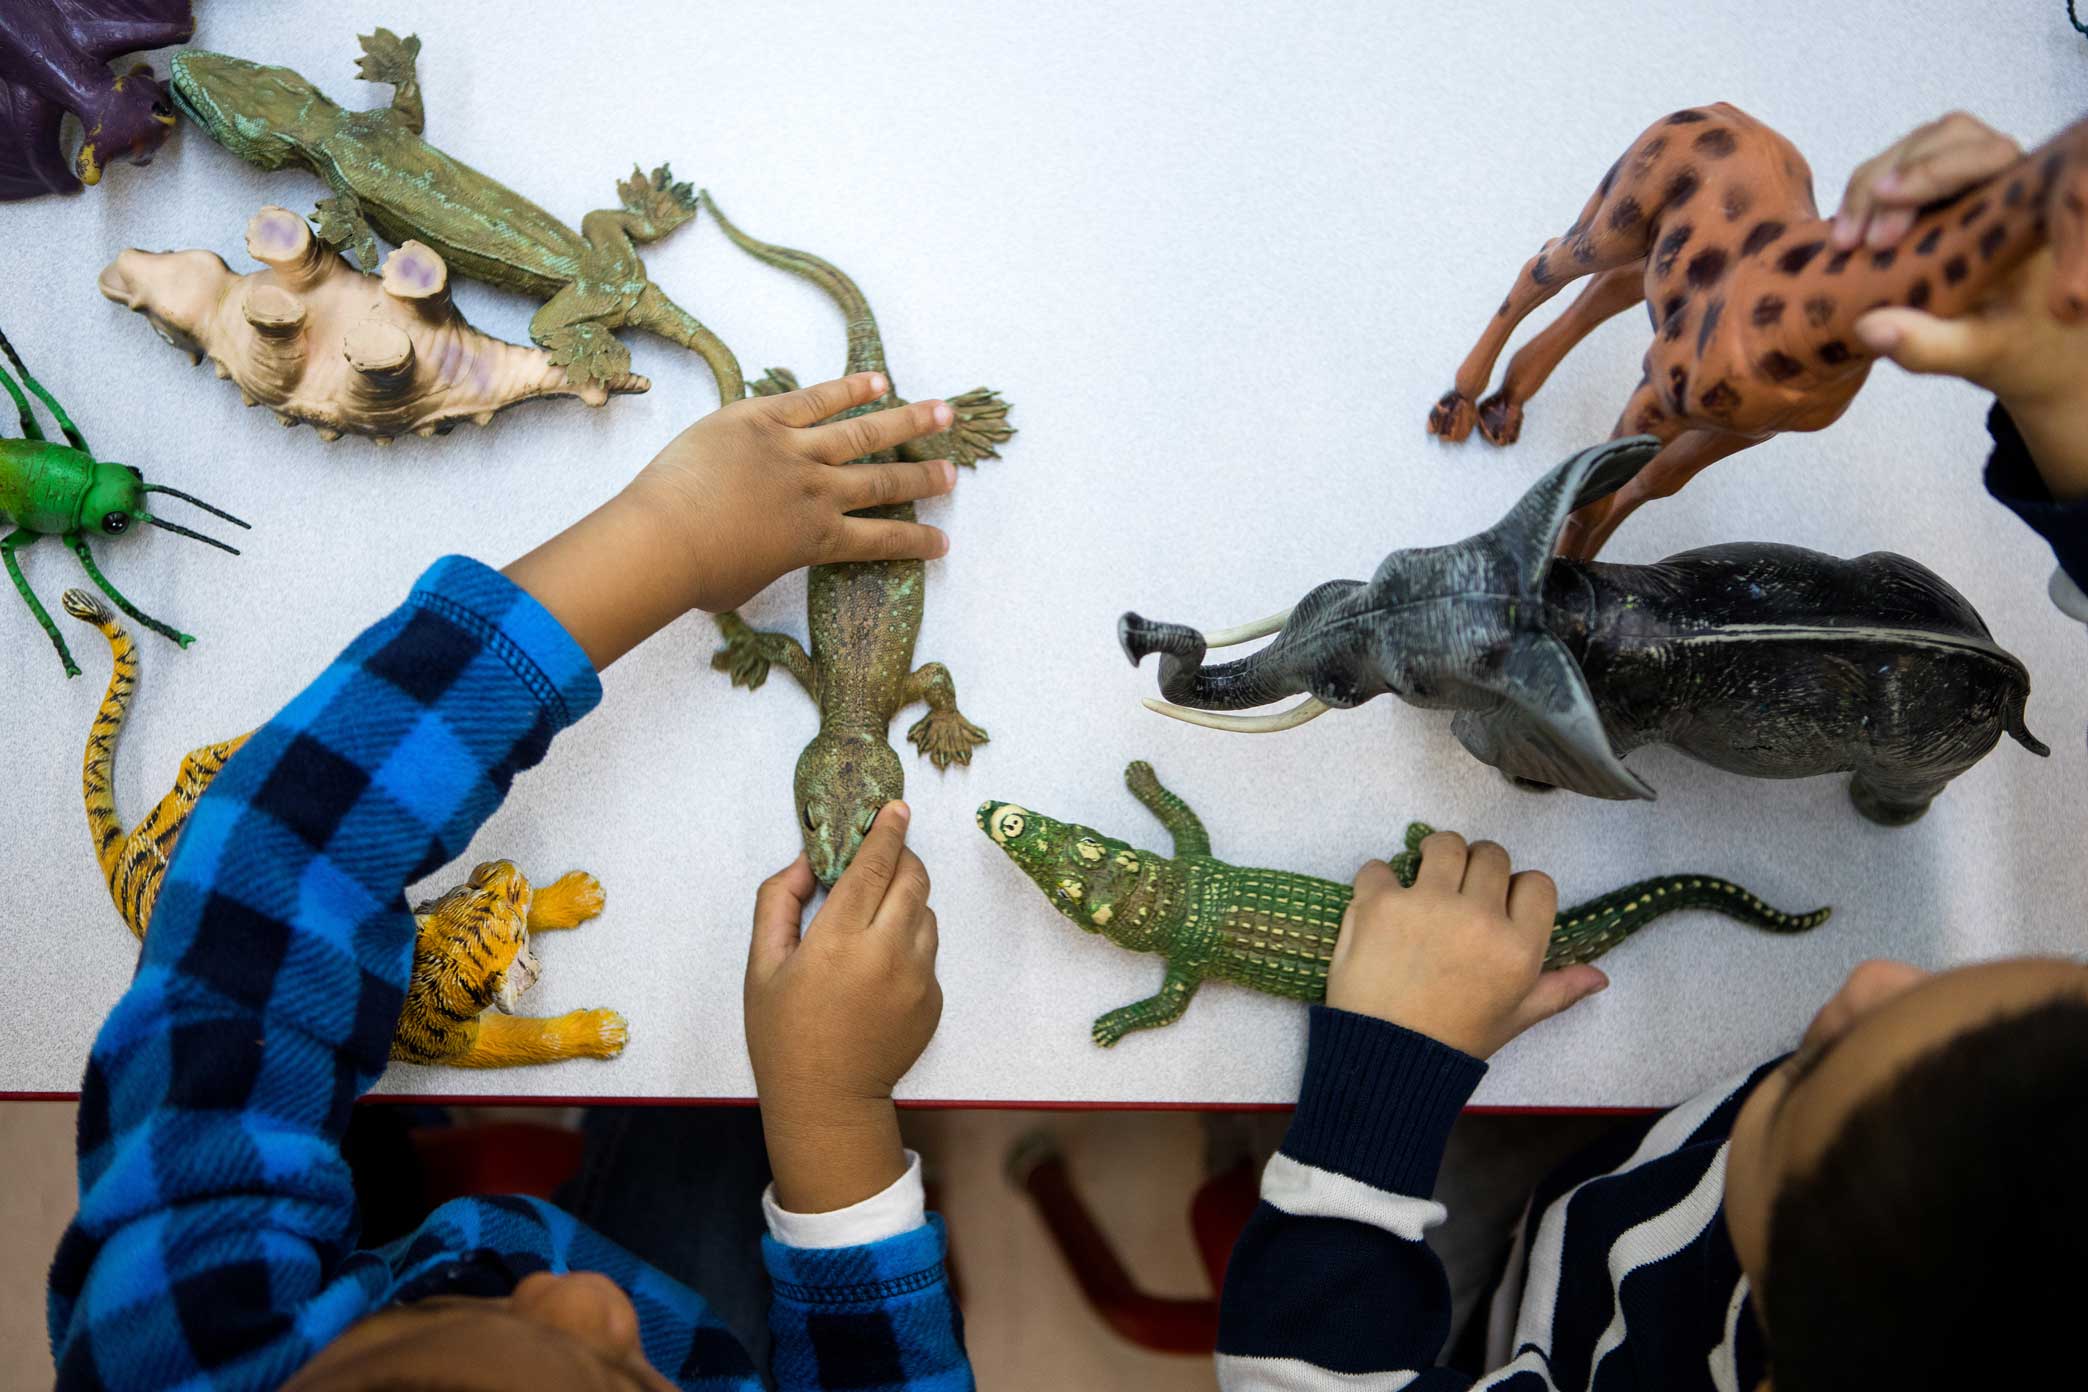  Students learning about animals in an EarlyLearn classroom at Union Settlement in Manhattan, New York. 